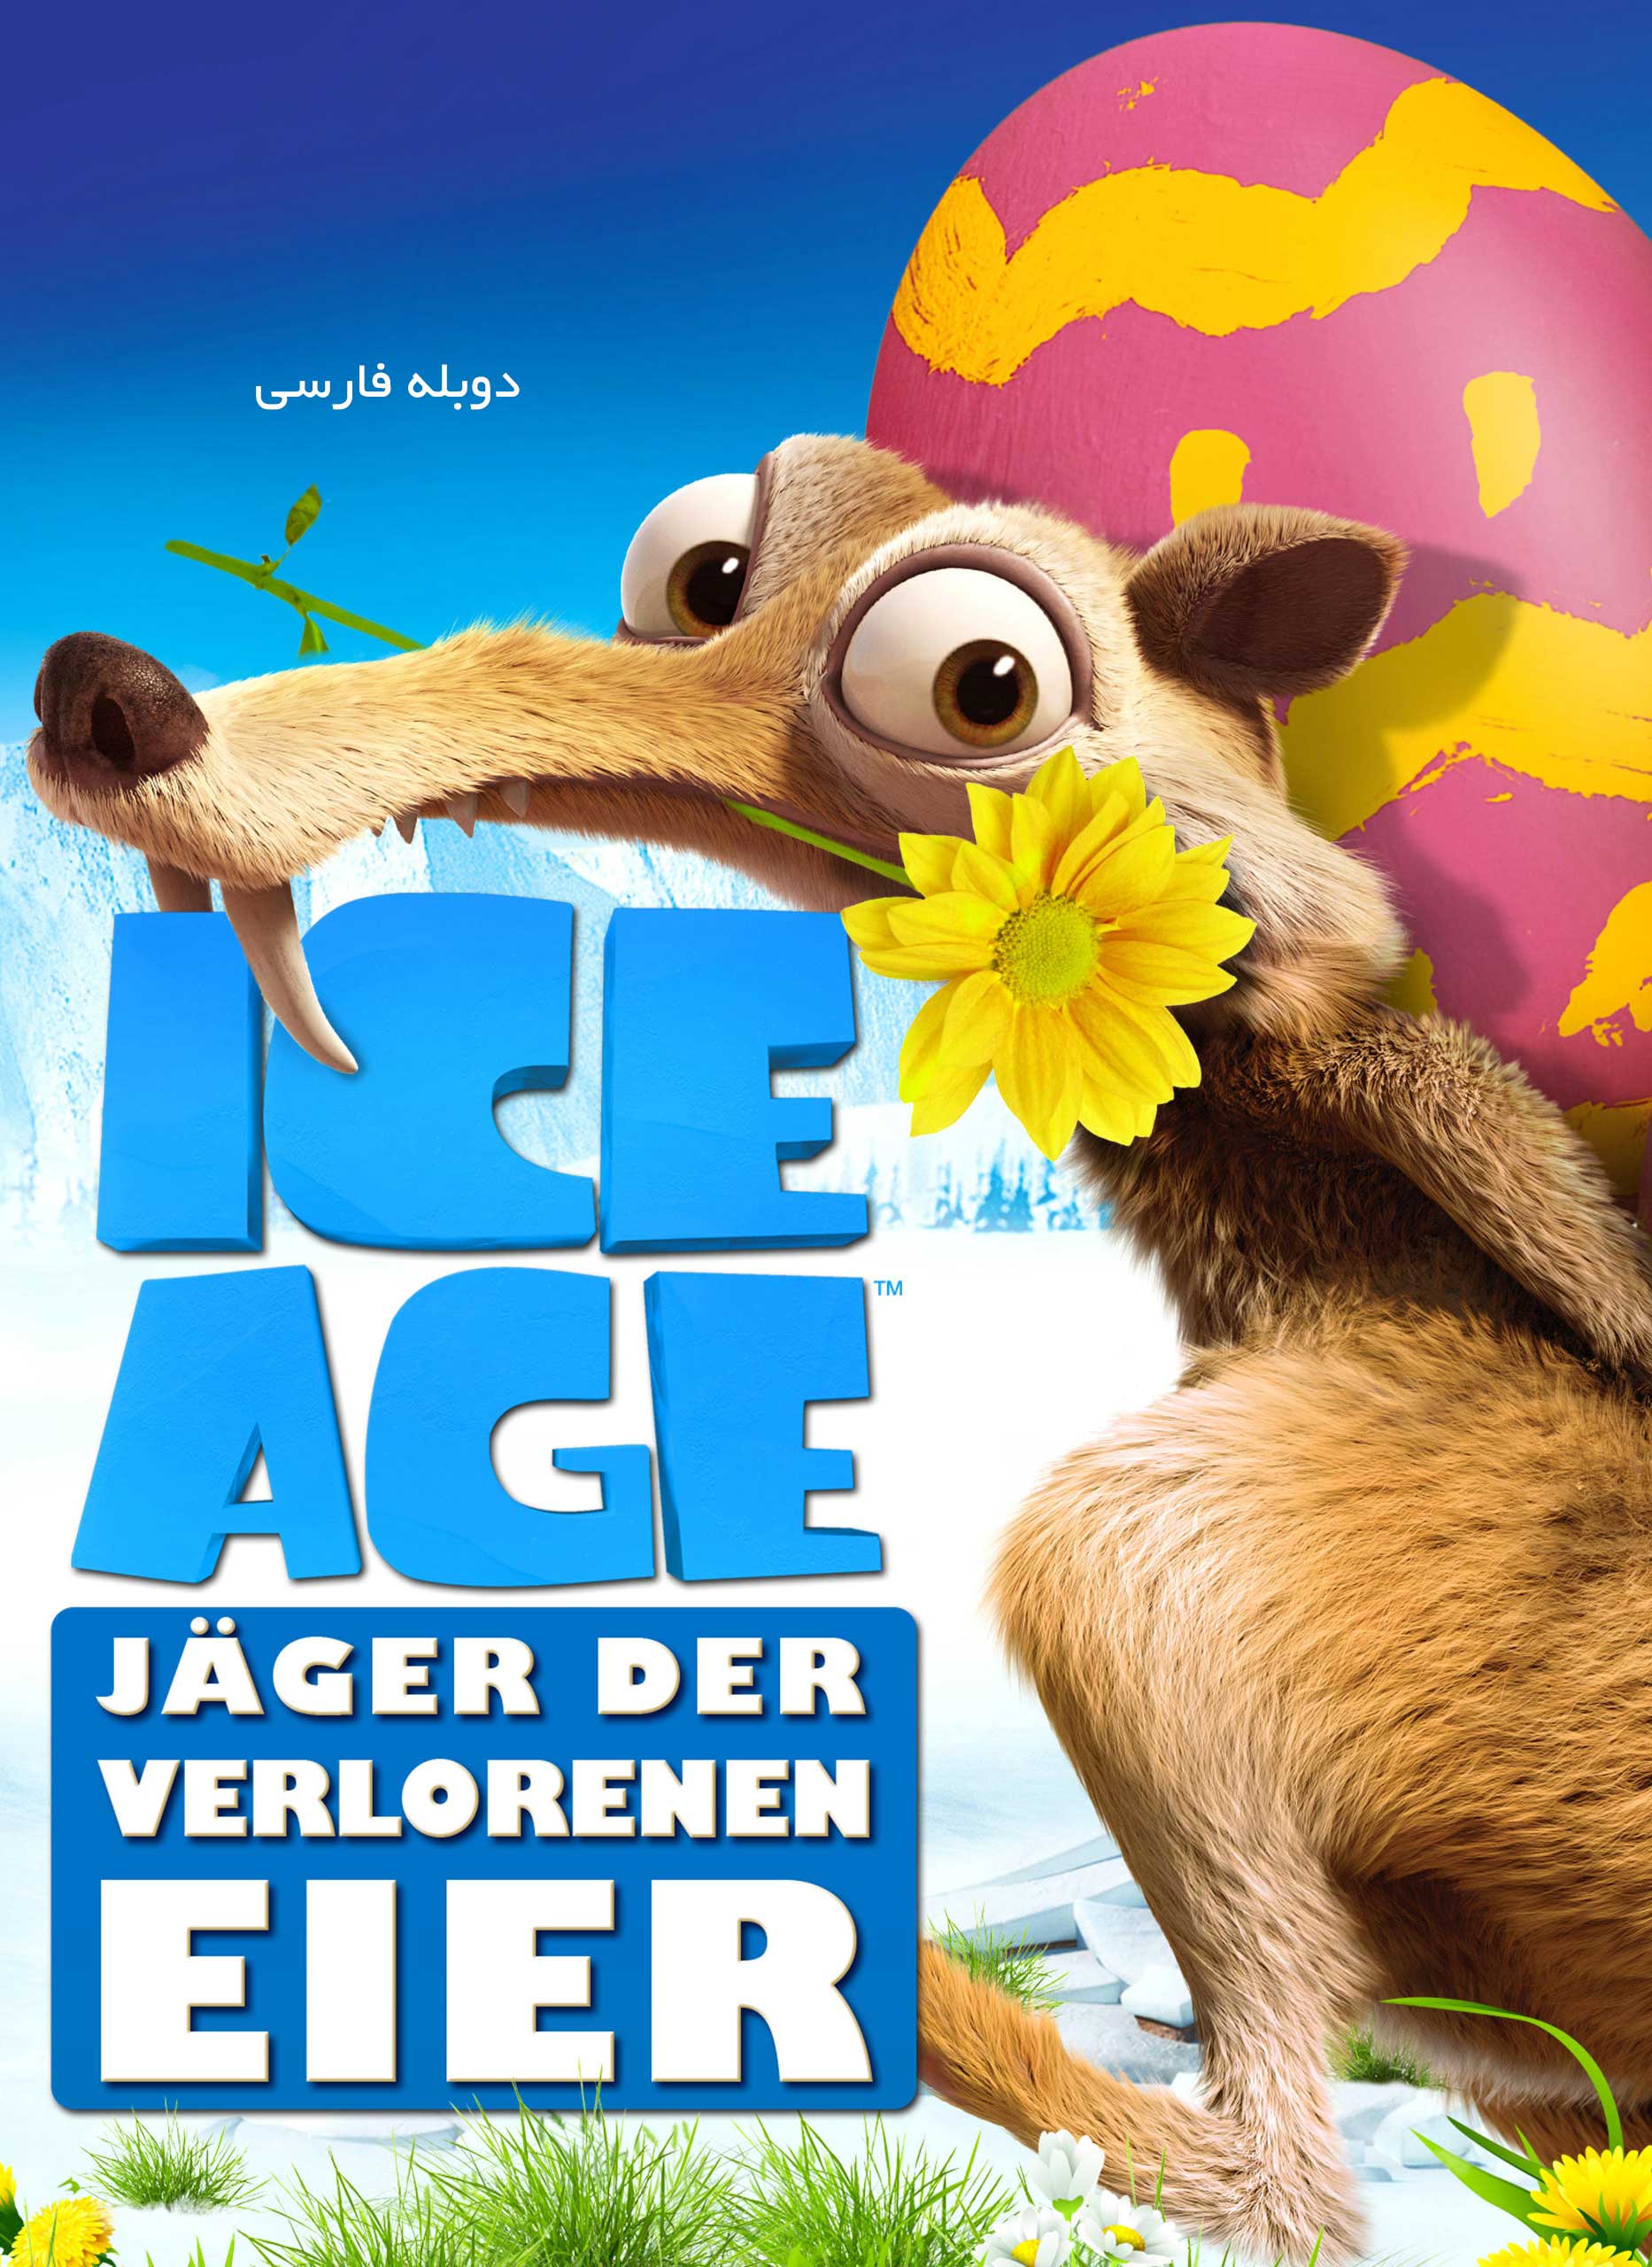 Ice Age The Great Egg Scapade - انیمیشن Ice Age The Great Egg Scapade